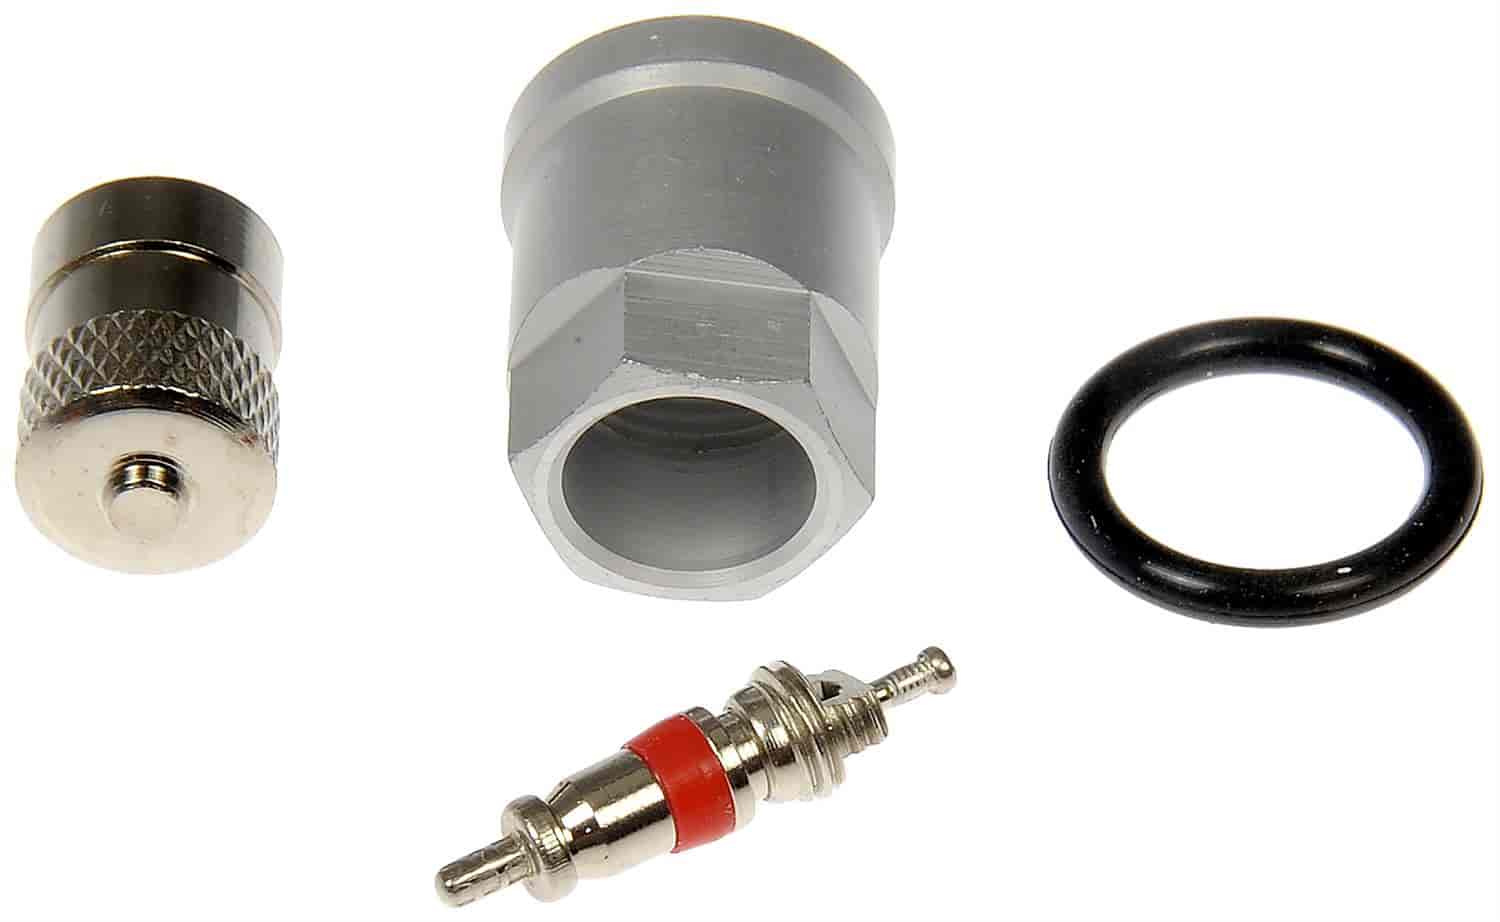 TPMS Service Kit - Replacement Grommet Valve Core and Cap